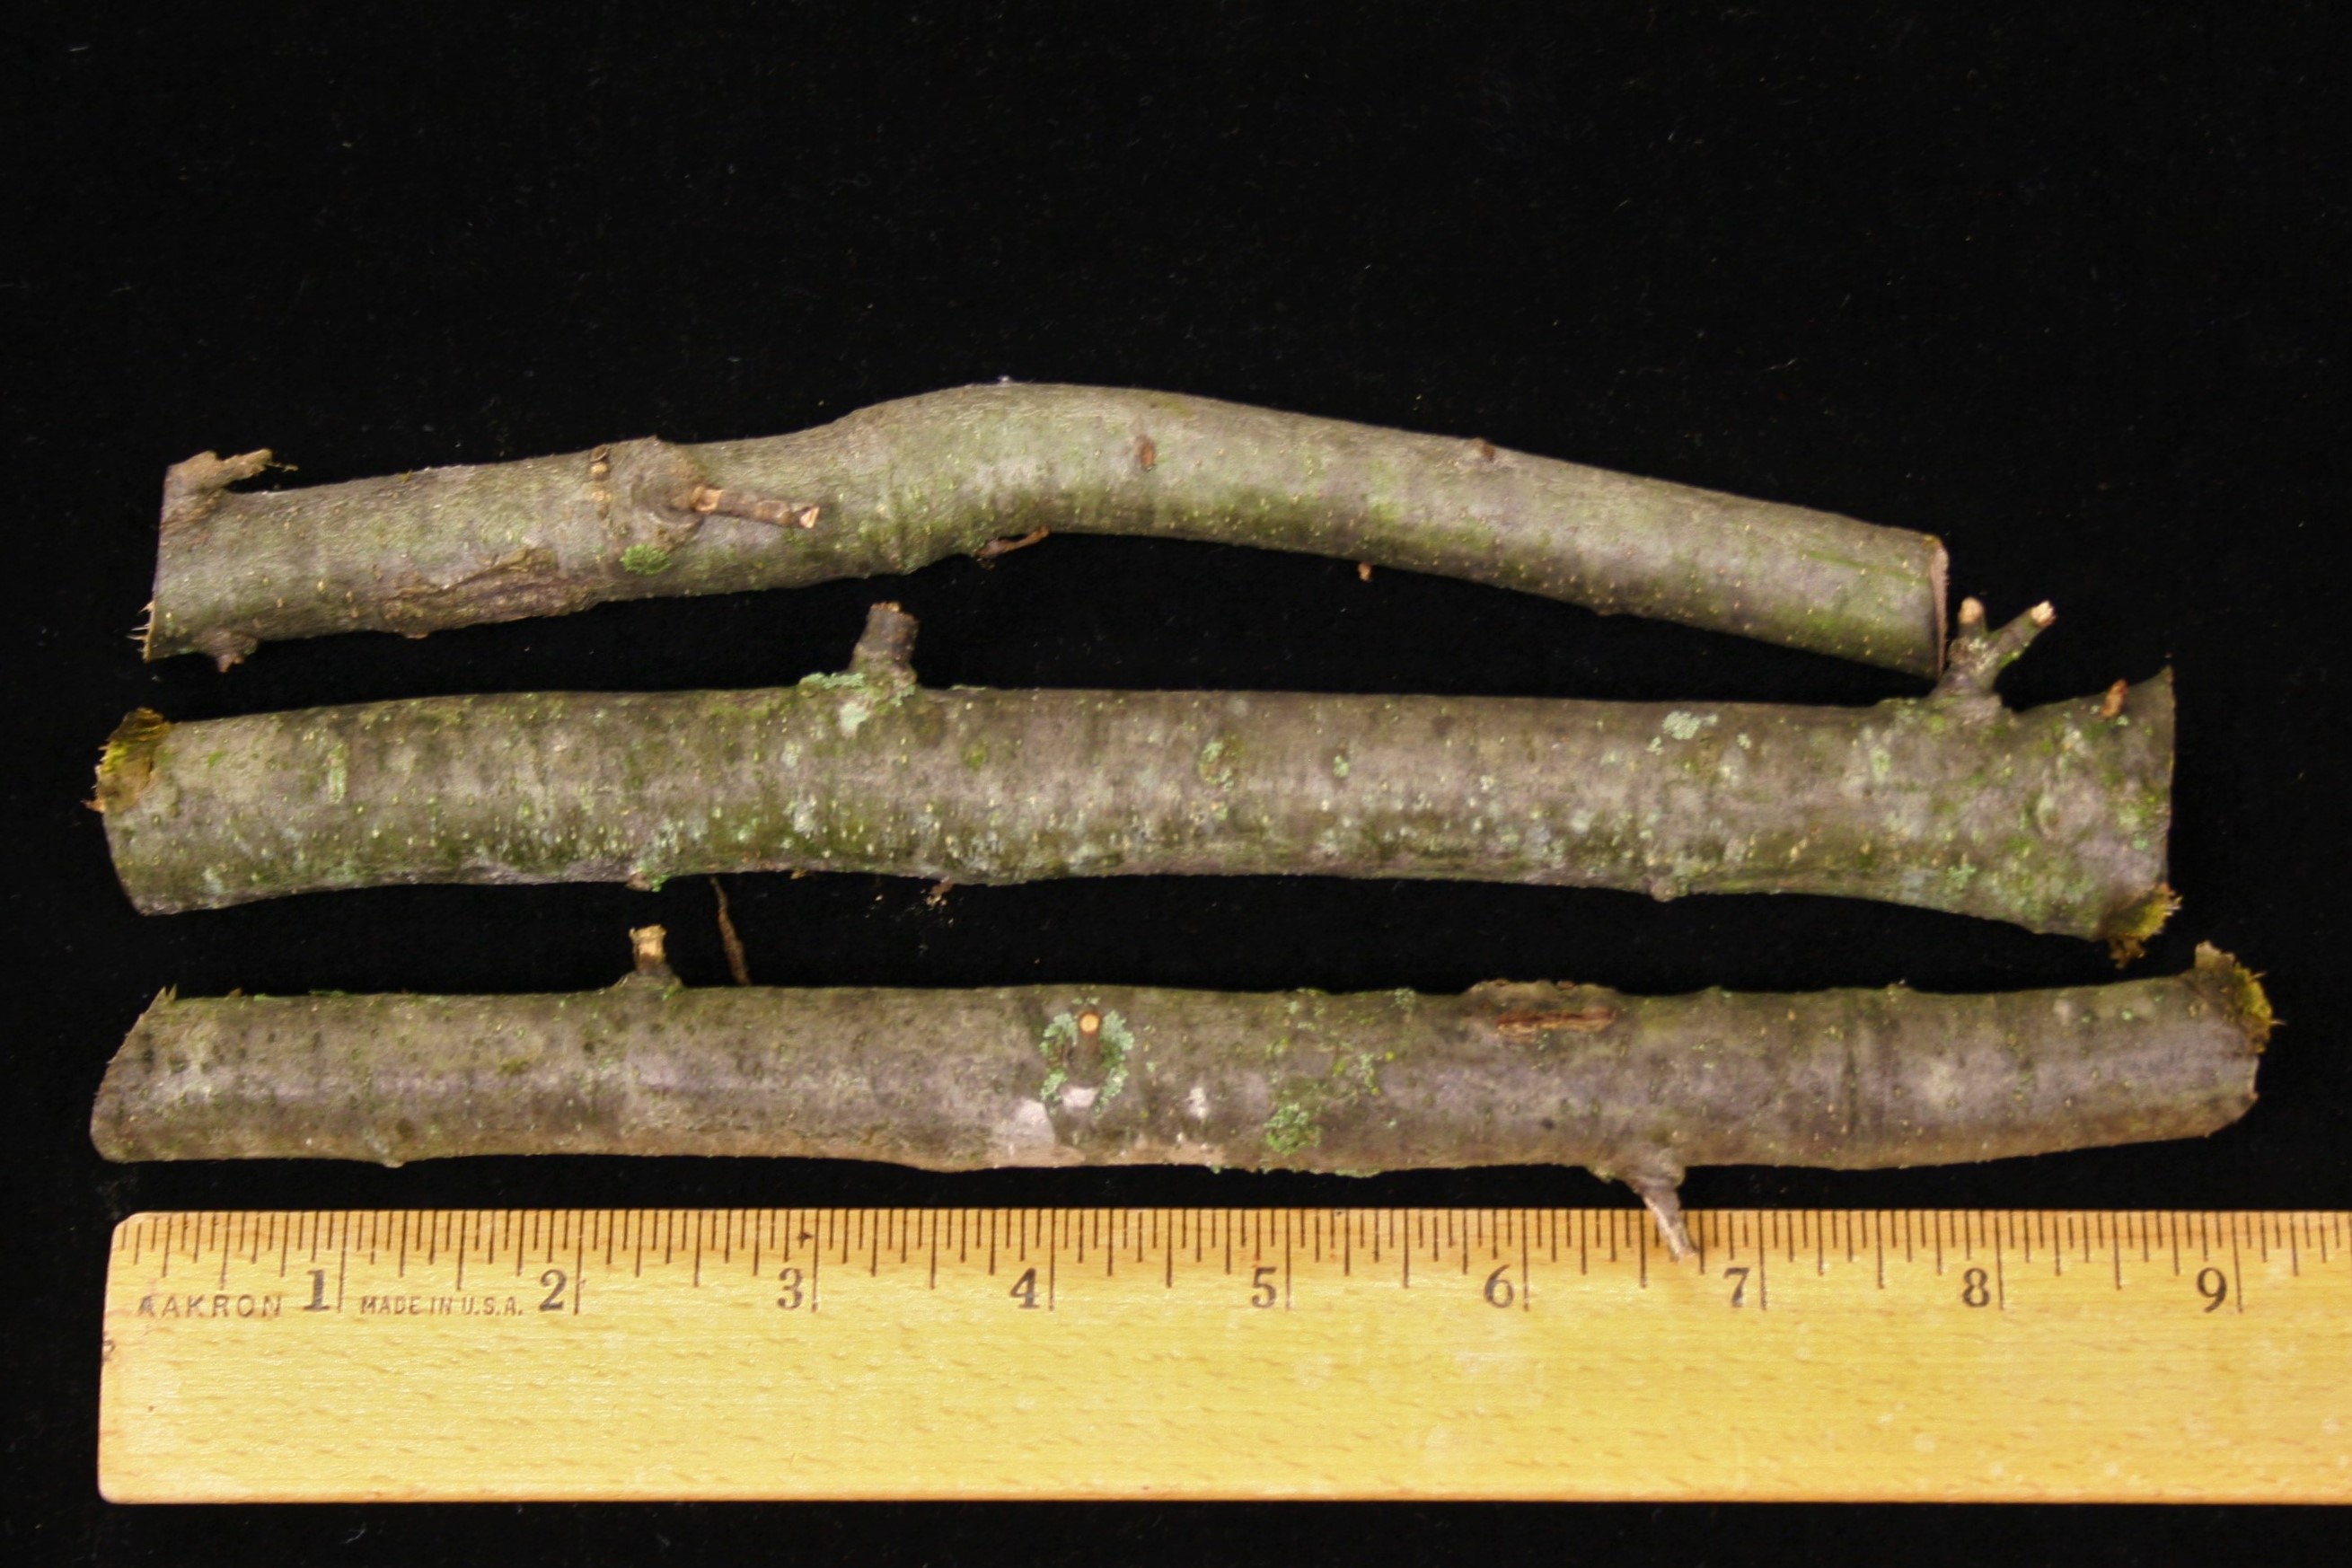 A sample of 3 branches submitted to the lab.